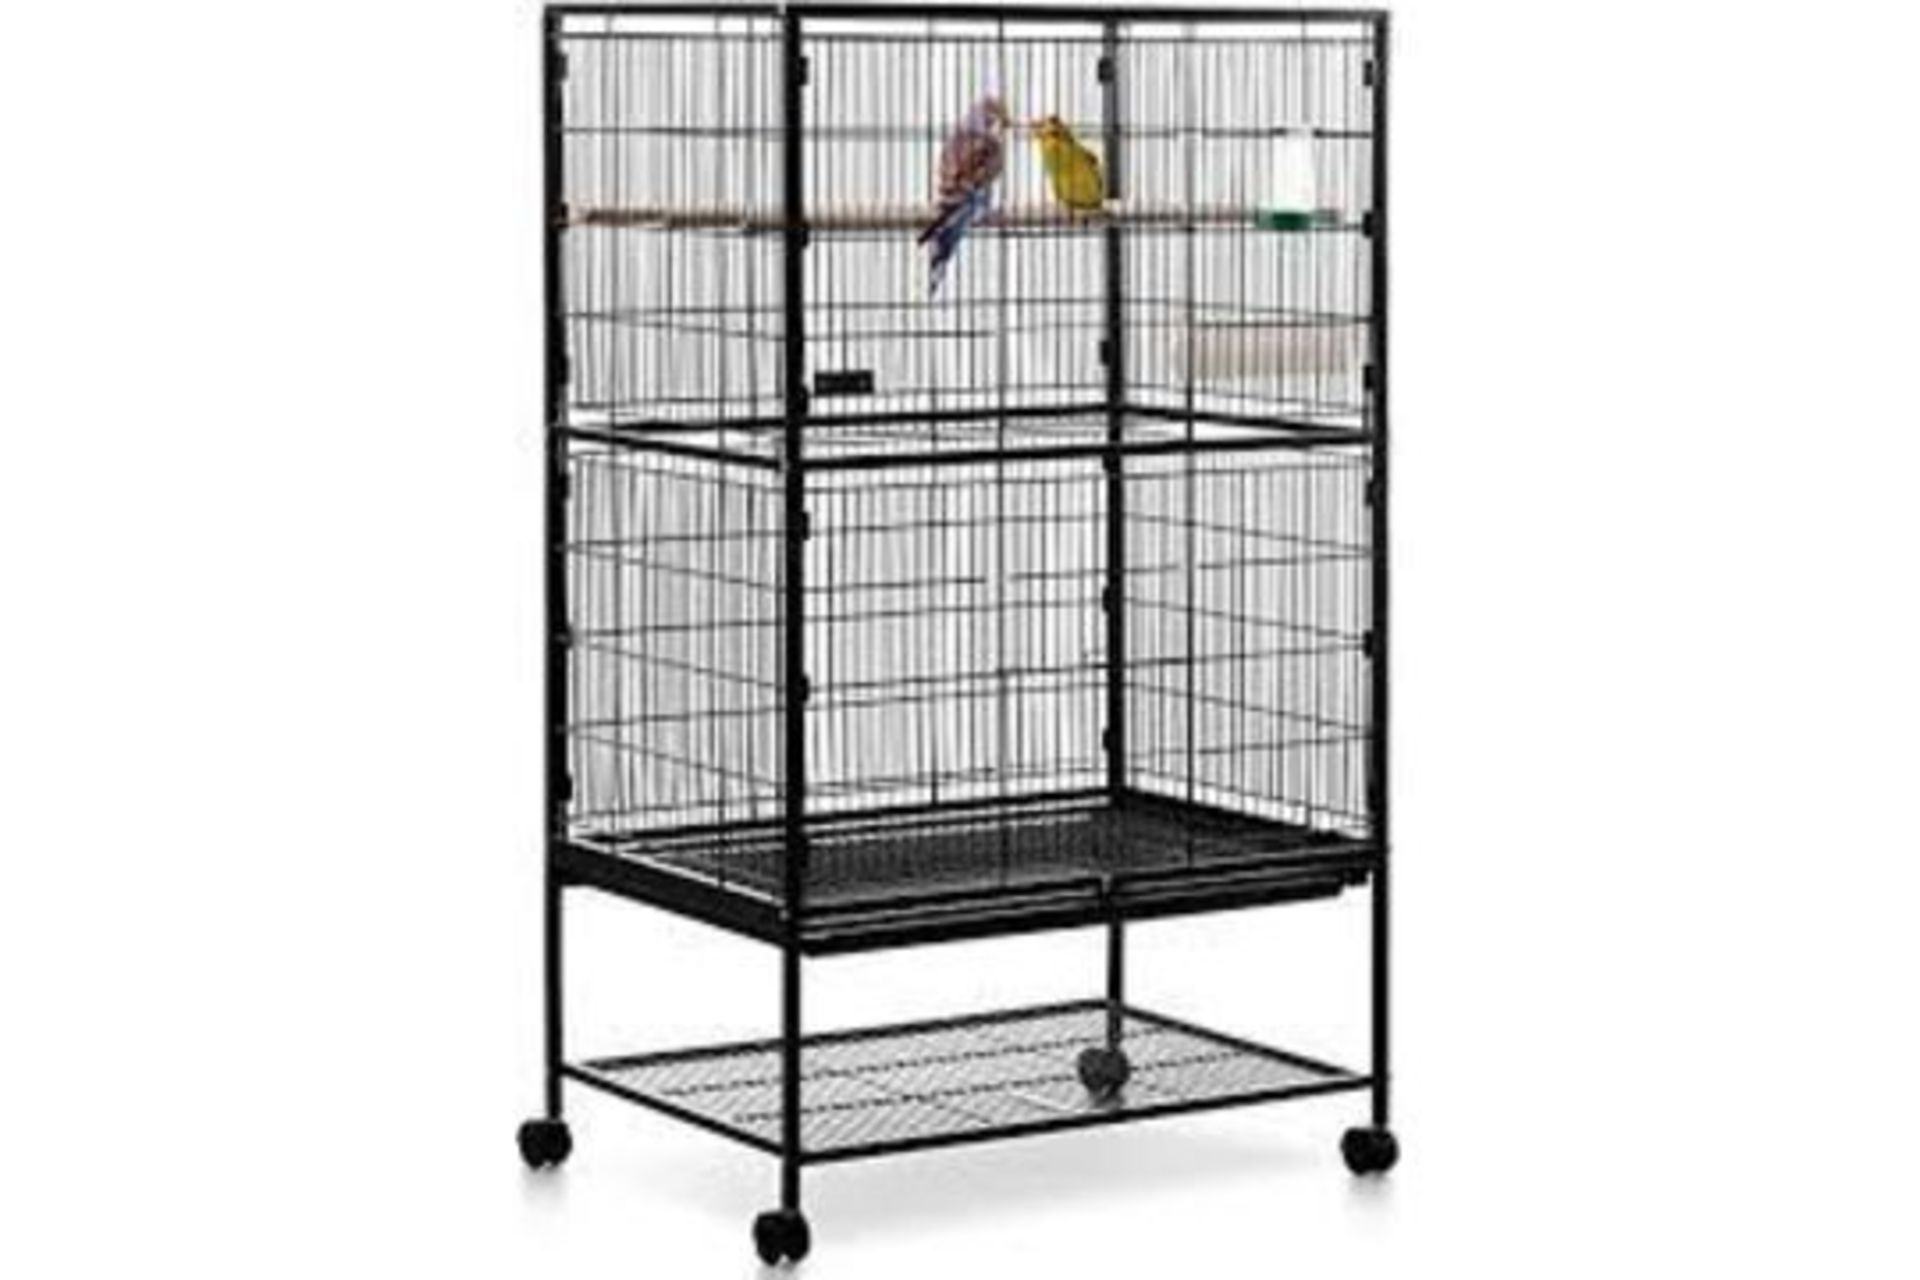 New & Boxed MILO & MISTY Large Bird Cage – 2 Tier Parrot Cage Metal Aviary for Budgies,